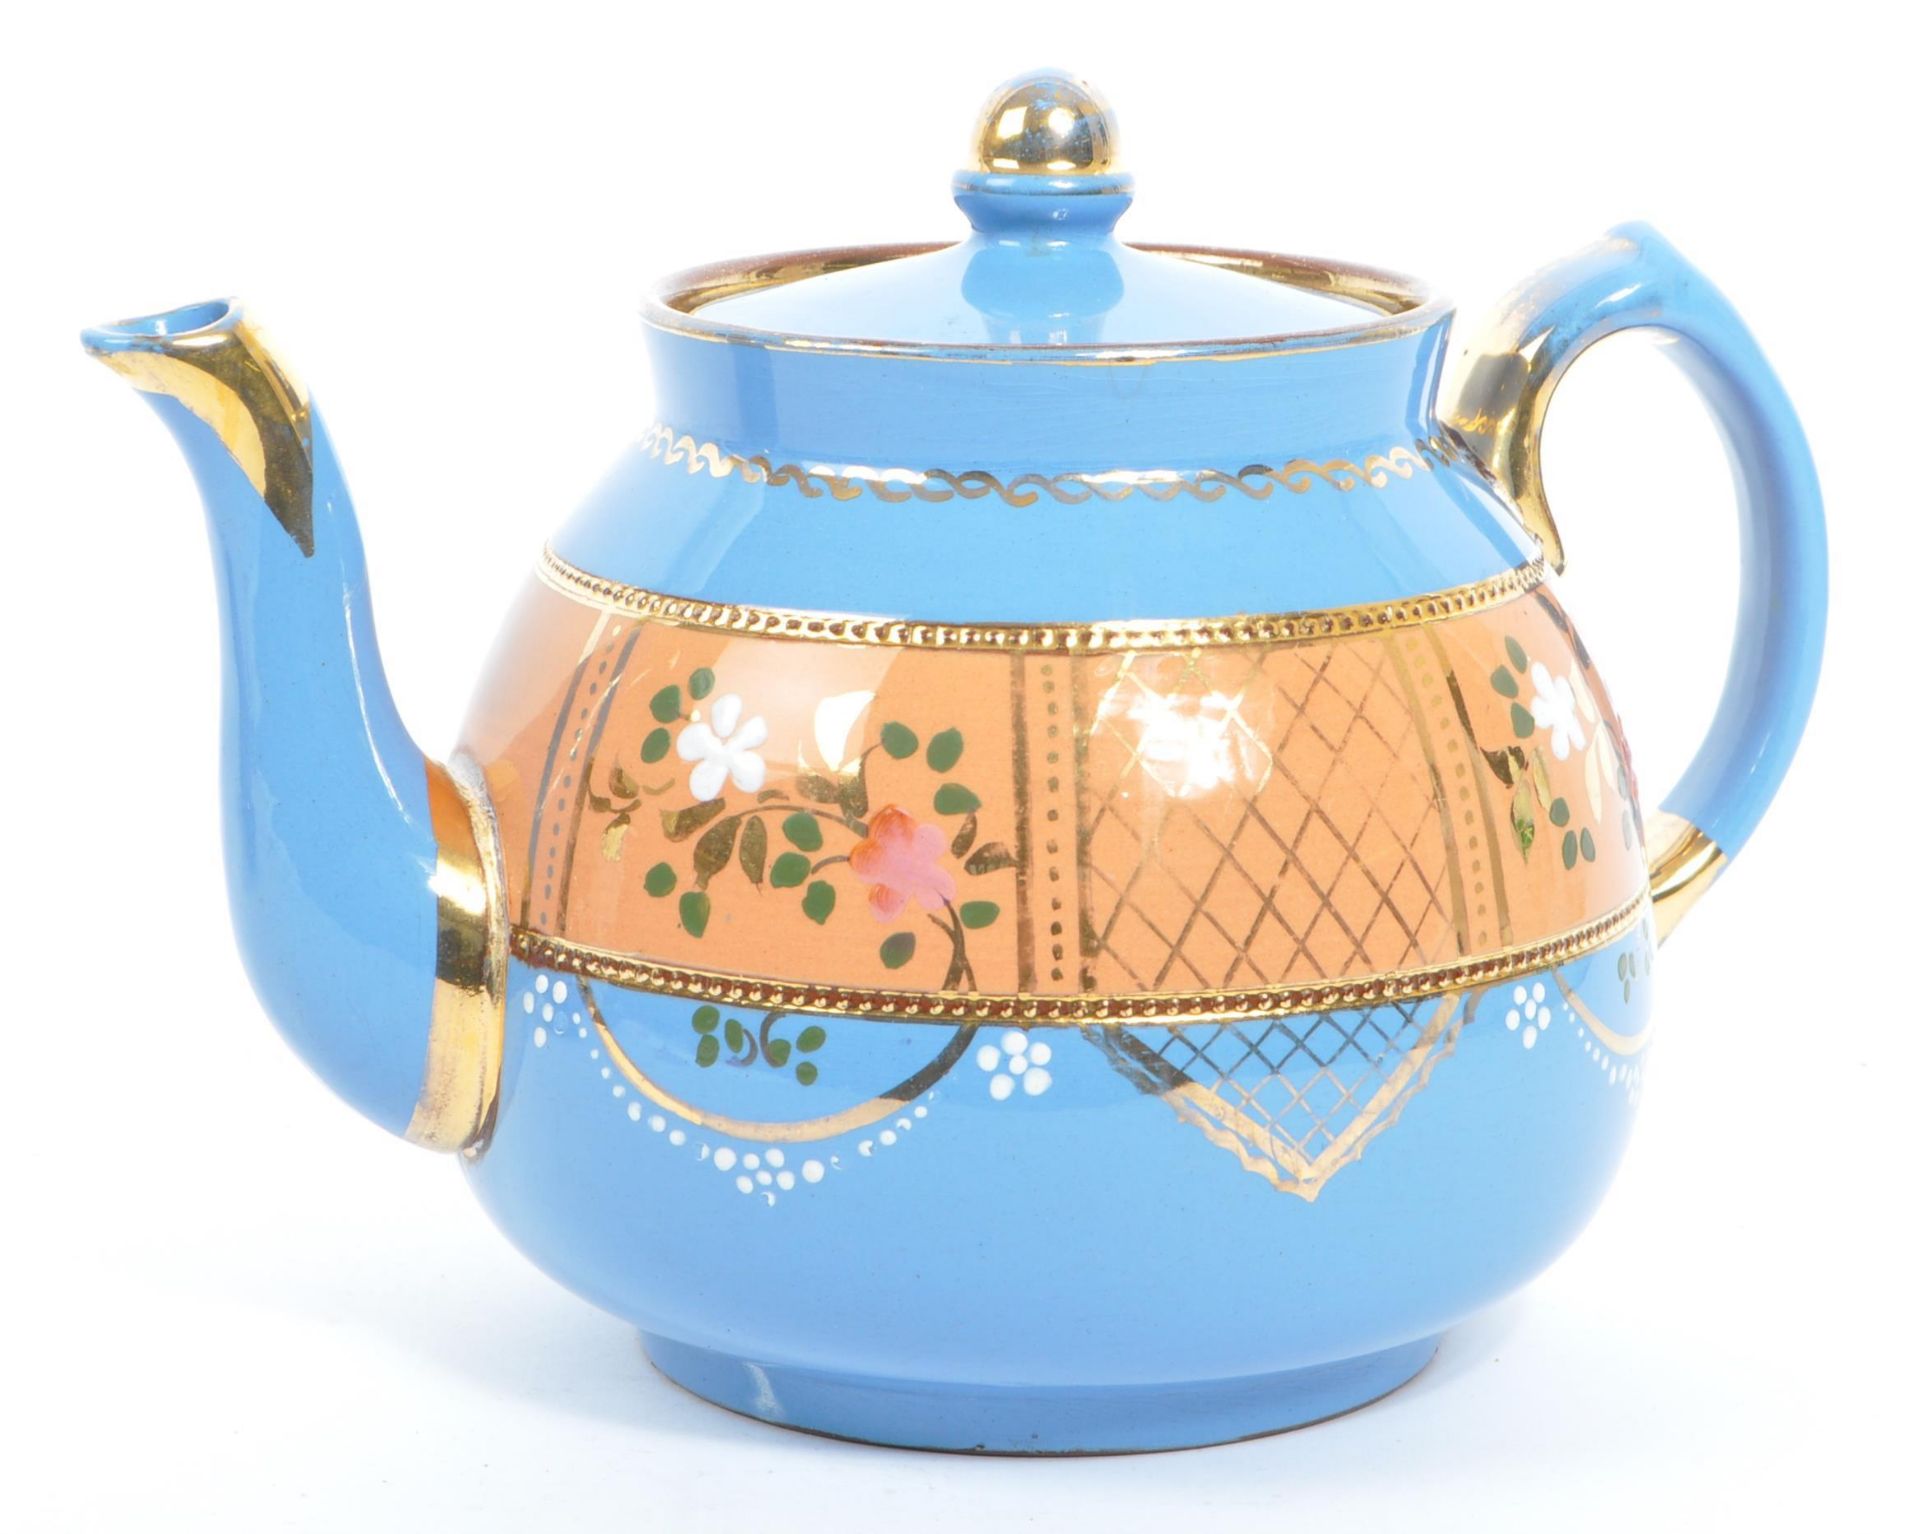 WADES - TWO HAND PAINTED DECORATED CERAMIC TEAPOTS - Image 2 of 8